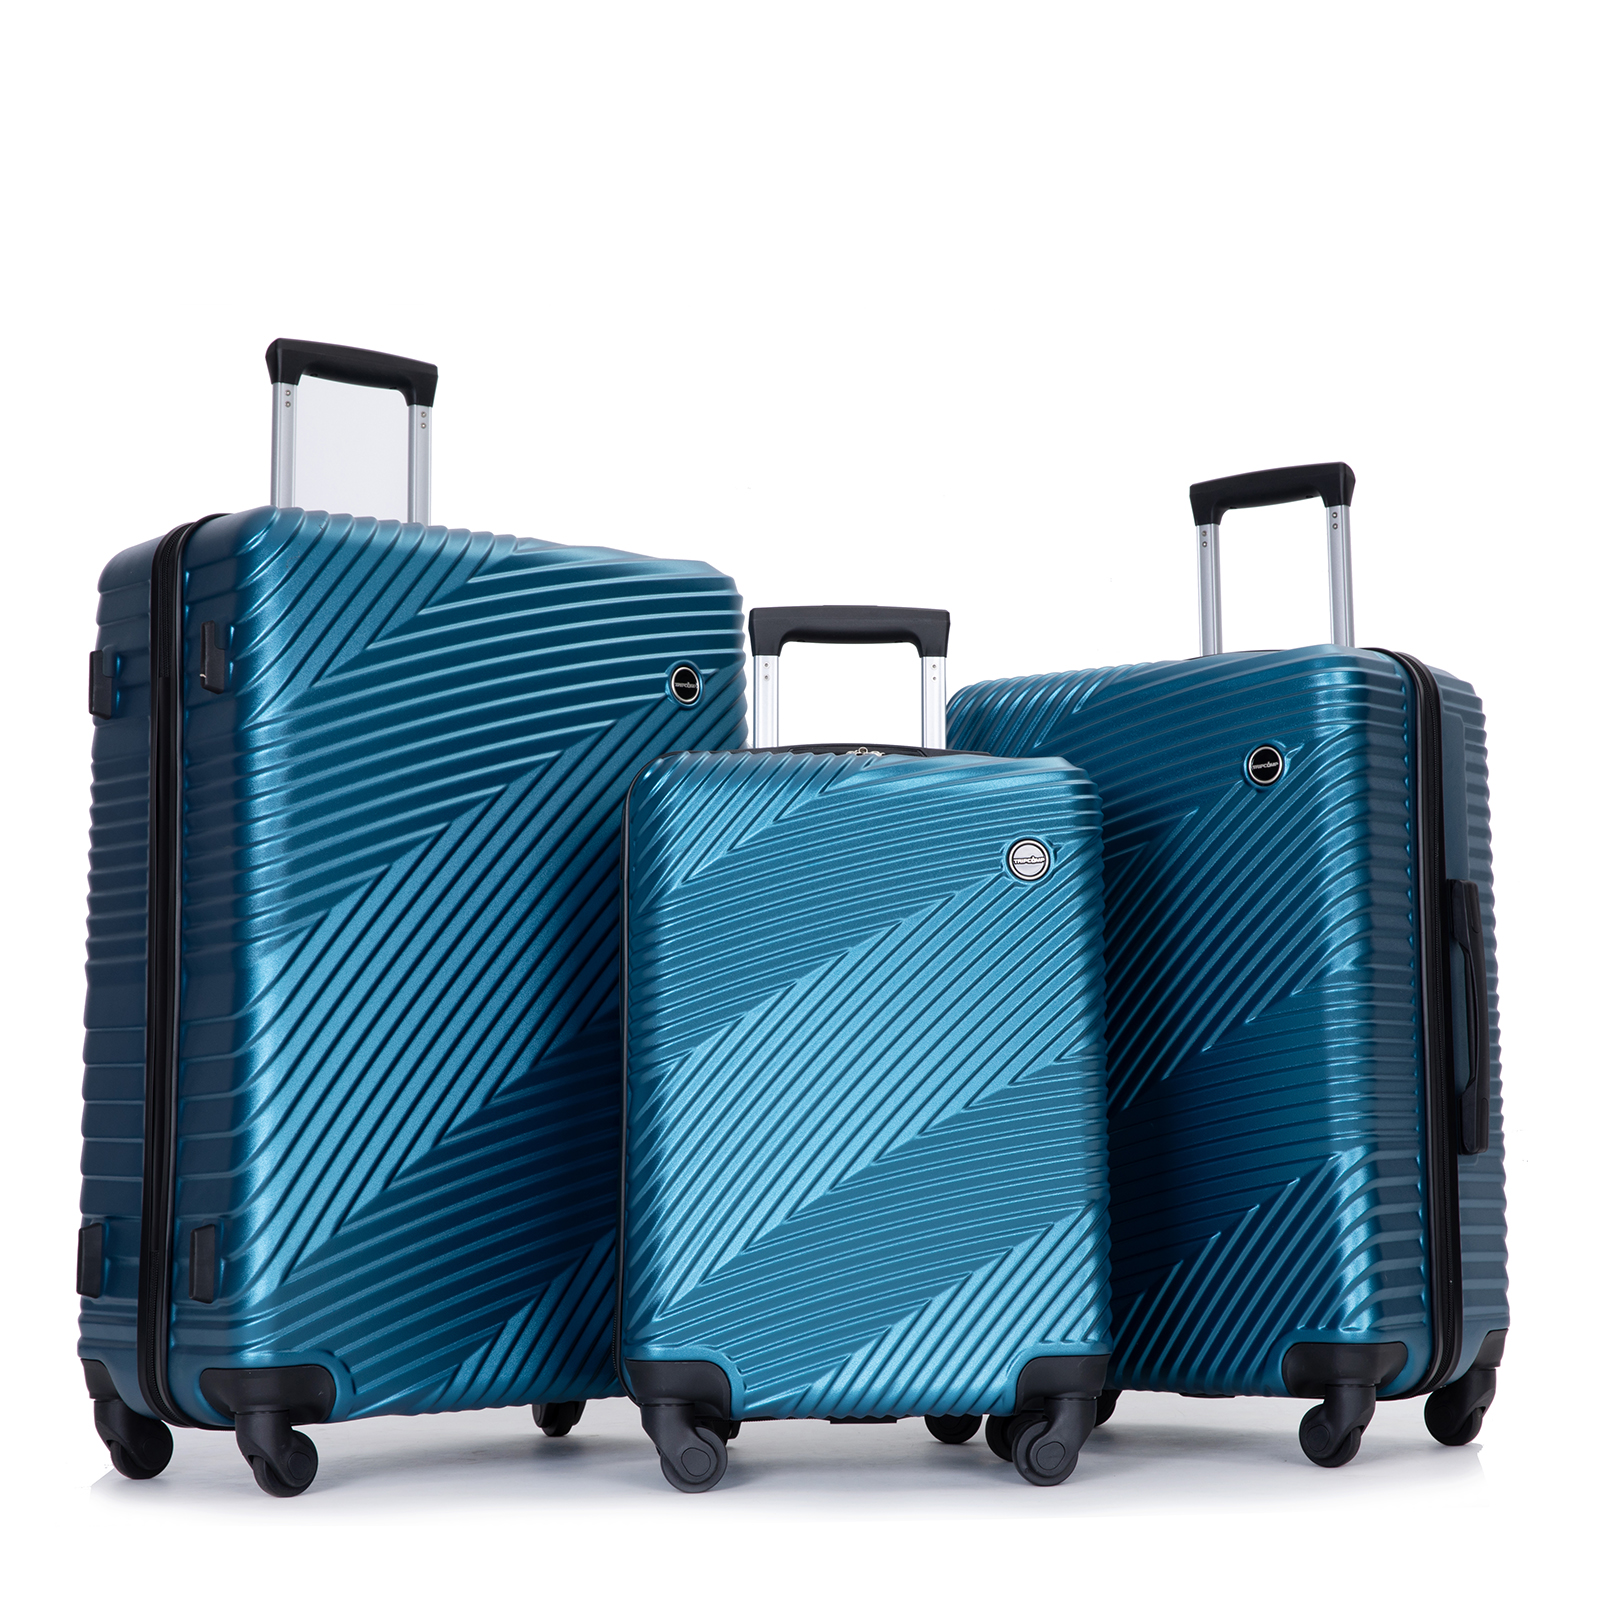 Tripcomp Luggage 3 Piece Set,Suitcase Set with Spinner Wheels Hardside Lightweight Luggage Set 20in24in28in.(Blue) - image 1 of 8